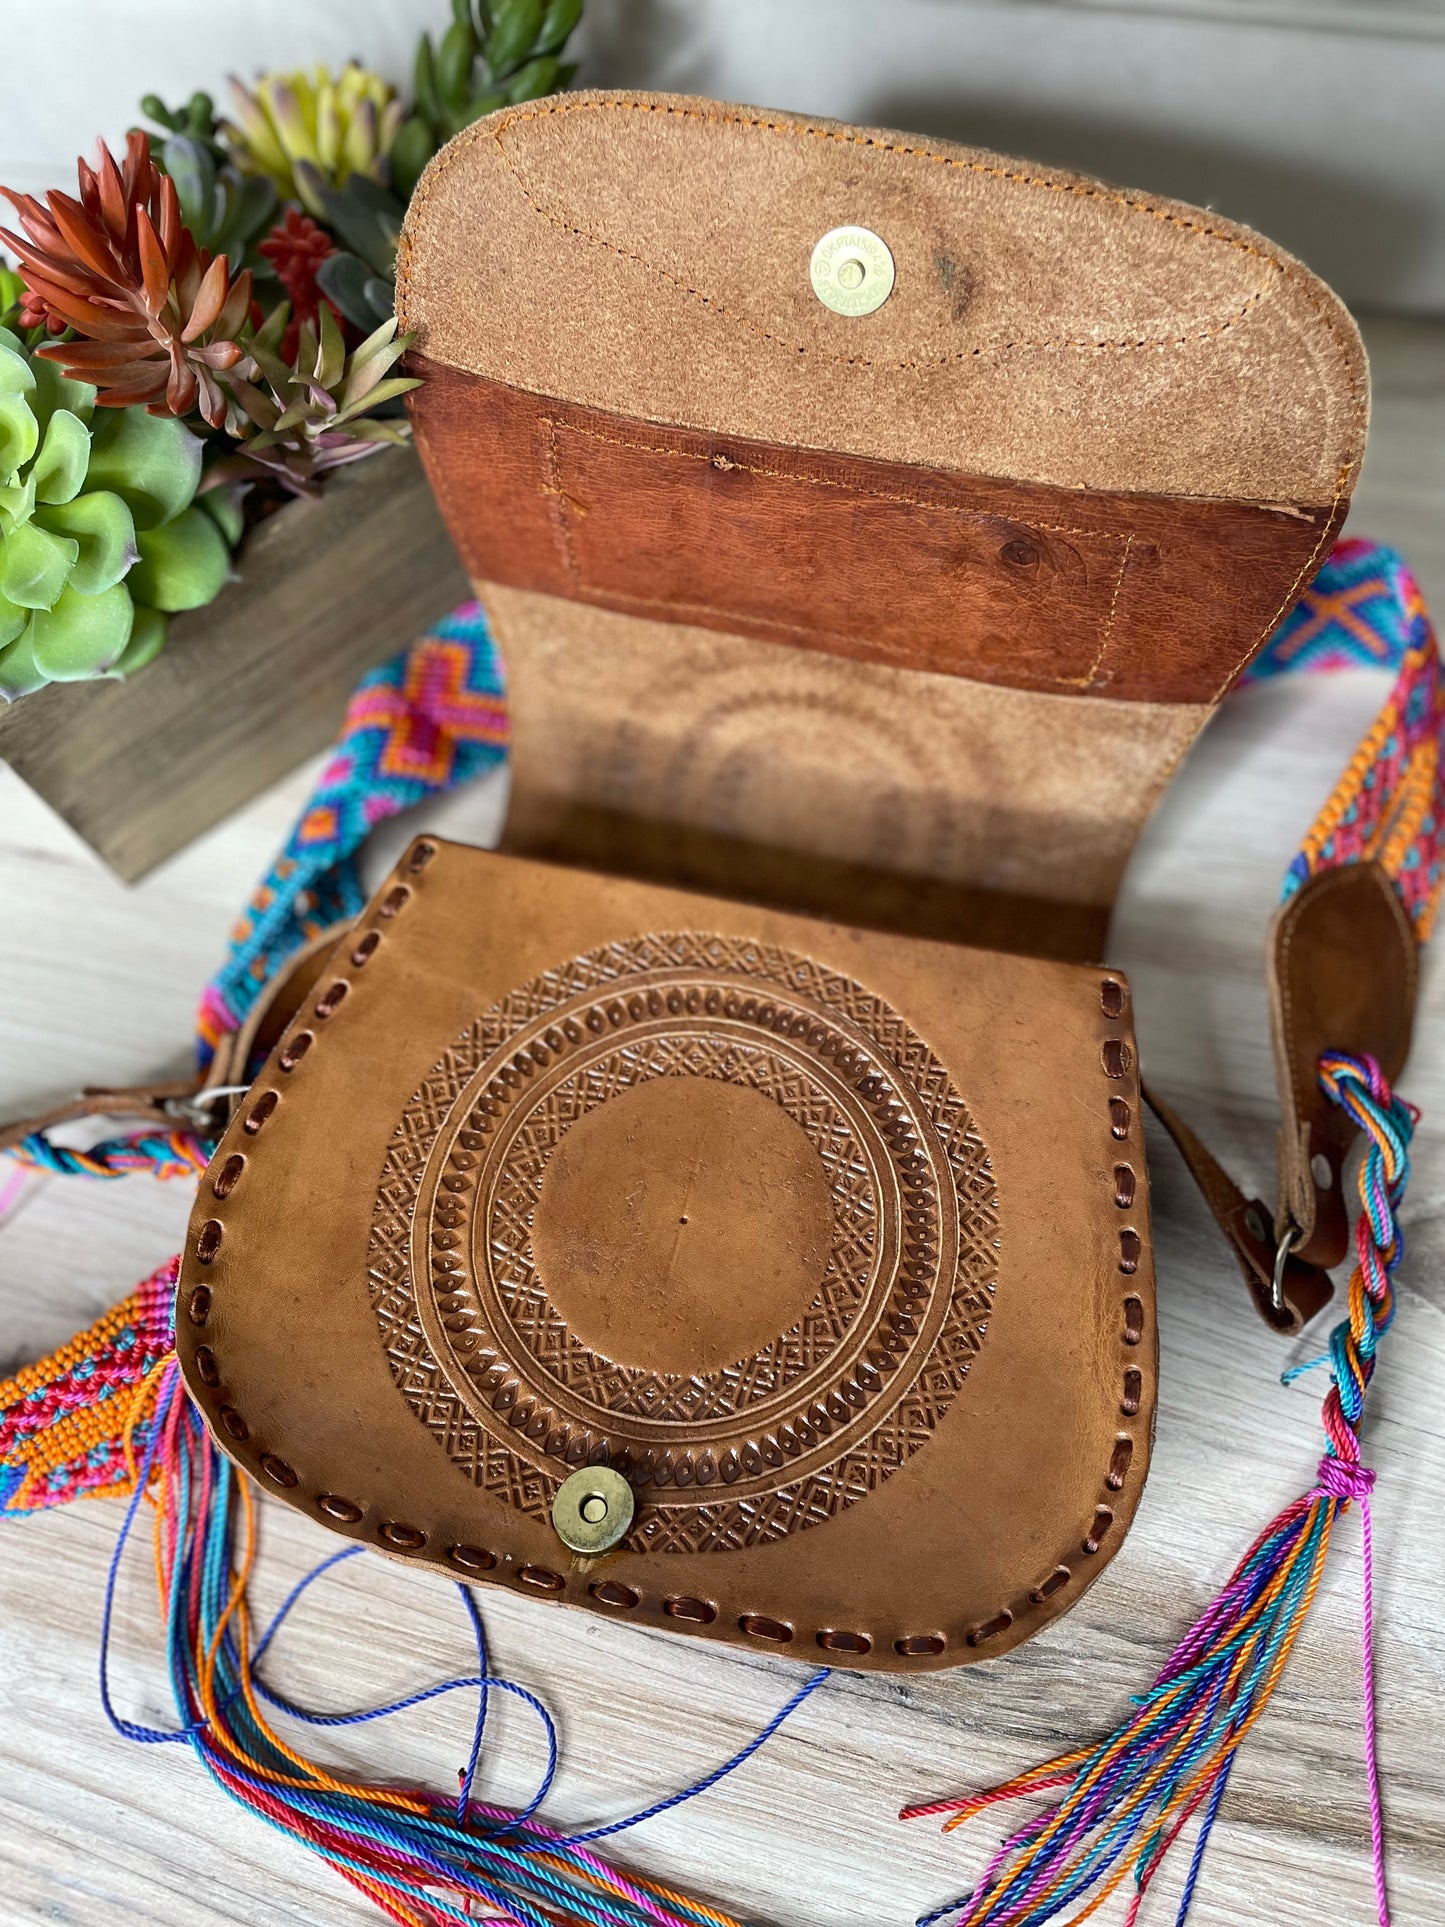 Mexican Leather Crossbody Saddle Bag - Hand Tooled